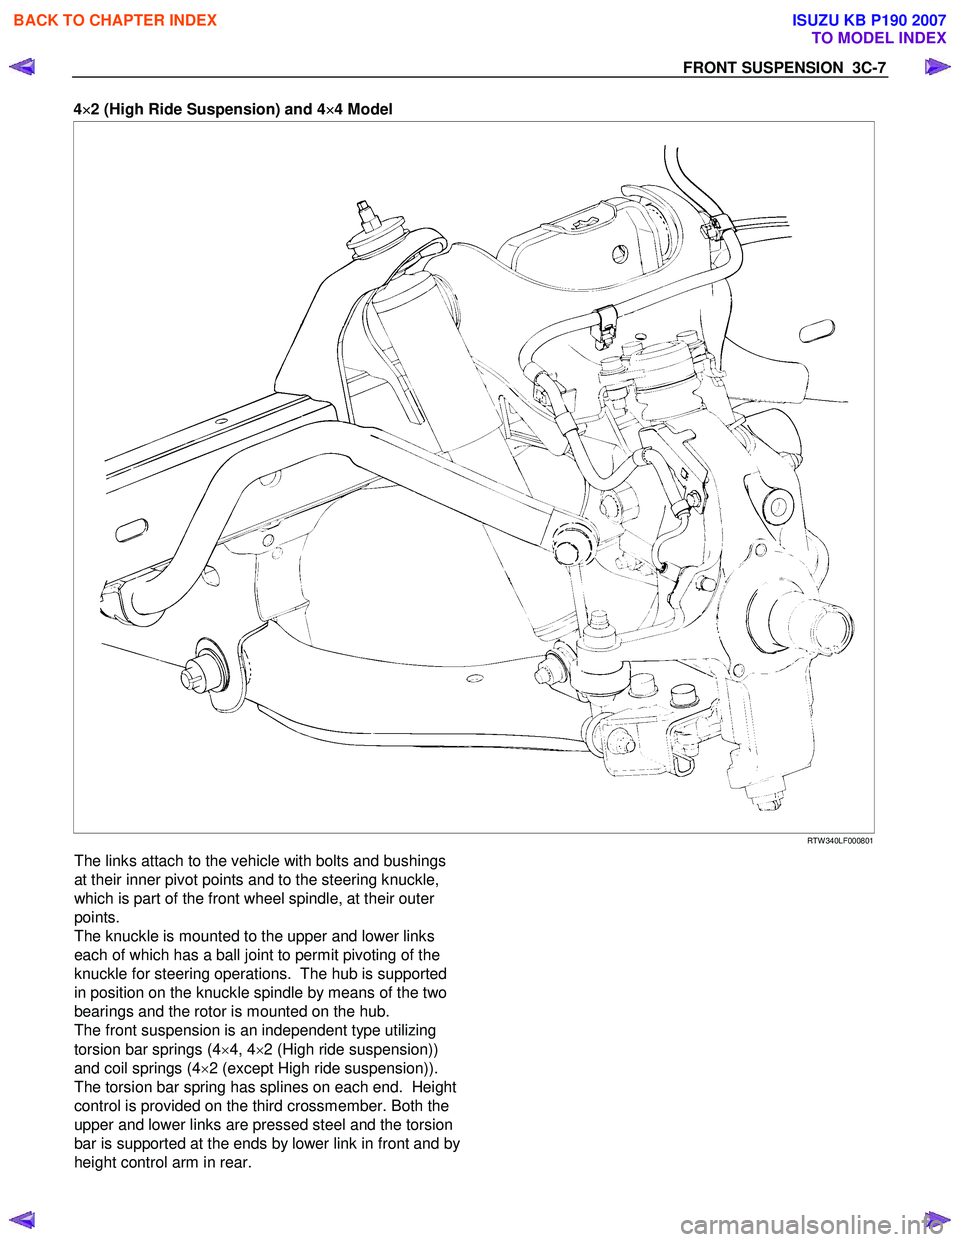 ISUZU KB P190 2007  Workshop Repair Manual FRONT SUSPENSION  3C-7 
4×
×× 
×
2 (High Ride Suspension) and 4 ×
××
×
4 Model 
 RTW 340LF000801 
The links attach to the vehicle with bolts and bushings  
at their inner pivot points and to t